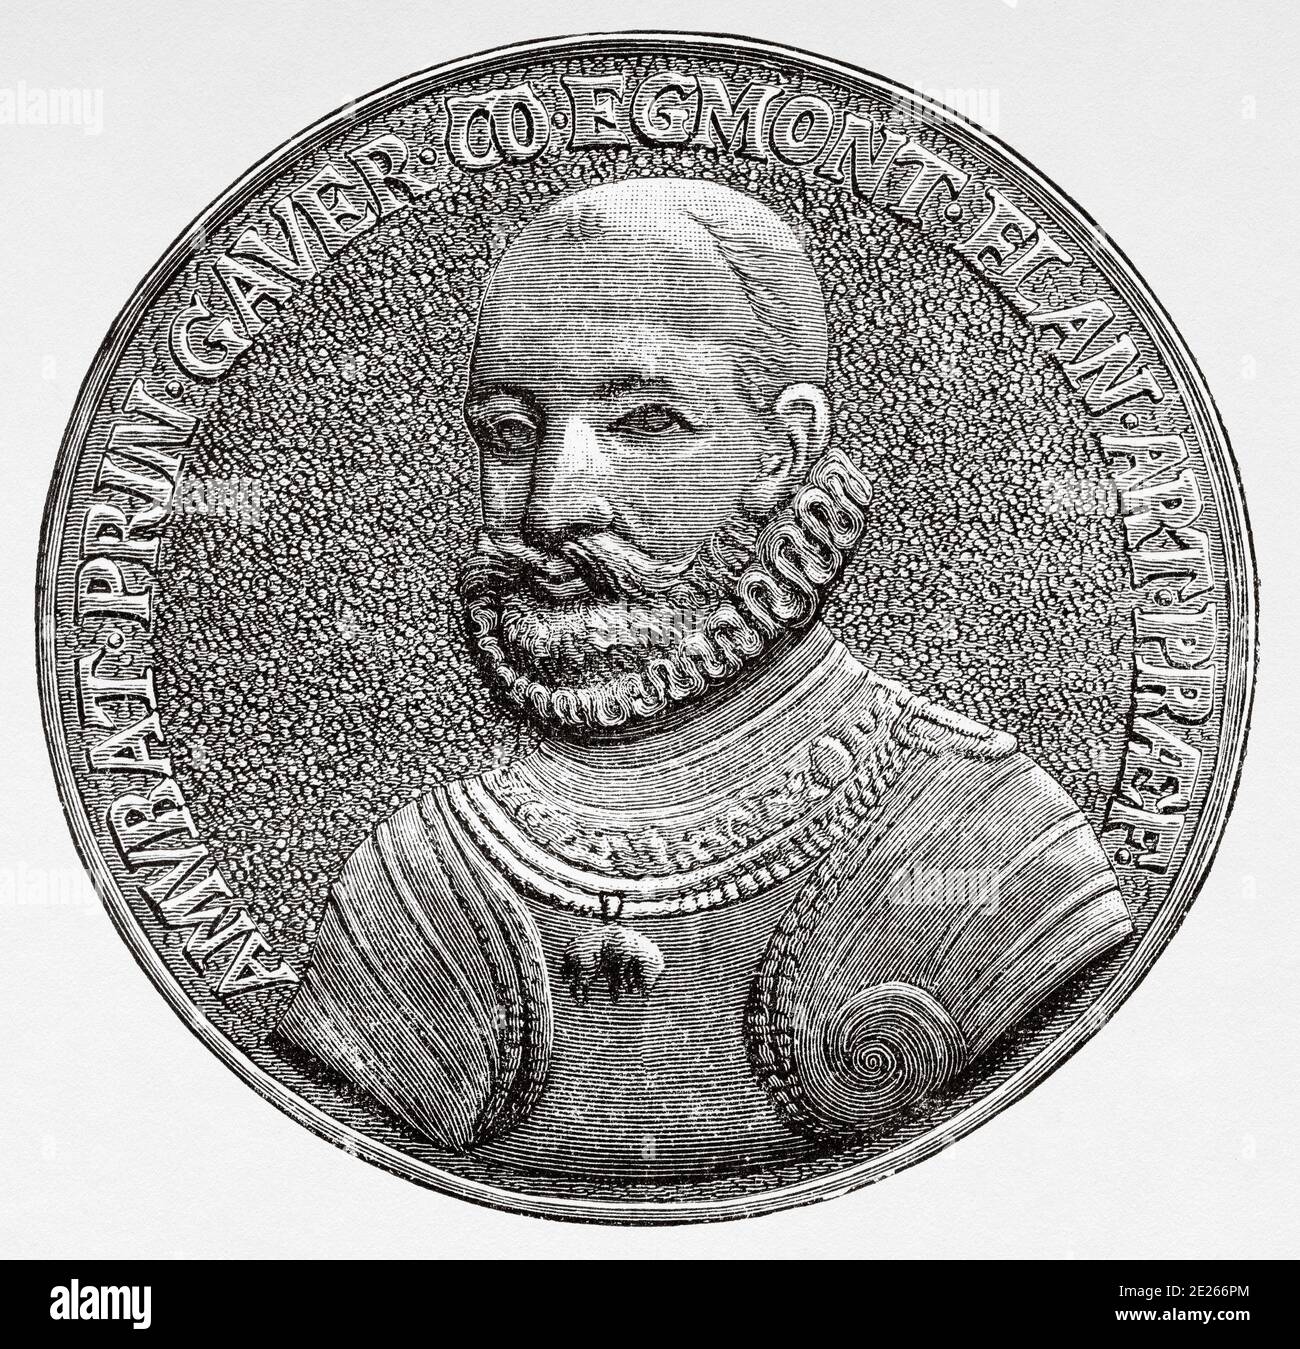 Portrait medal seal of Lamoral, count of Egmont (November 18, 1522 - June 5, 1568). Prince of Gavere, 1522 - 1568, Ritter and governor of Flanders and Artois,  General and Flander Stateman and knight of the Order of the Golden Fleece. History of Philip II of Spain. Old engraving published in Historia de Felipe II by H. Forneron, in 1884 Stock Photo